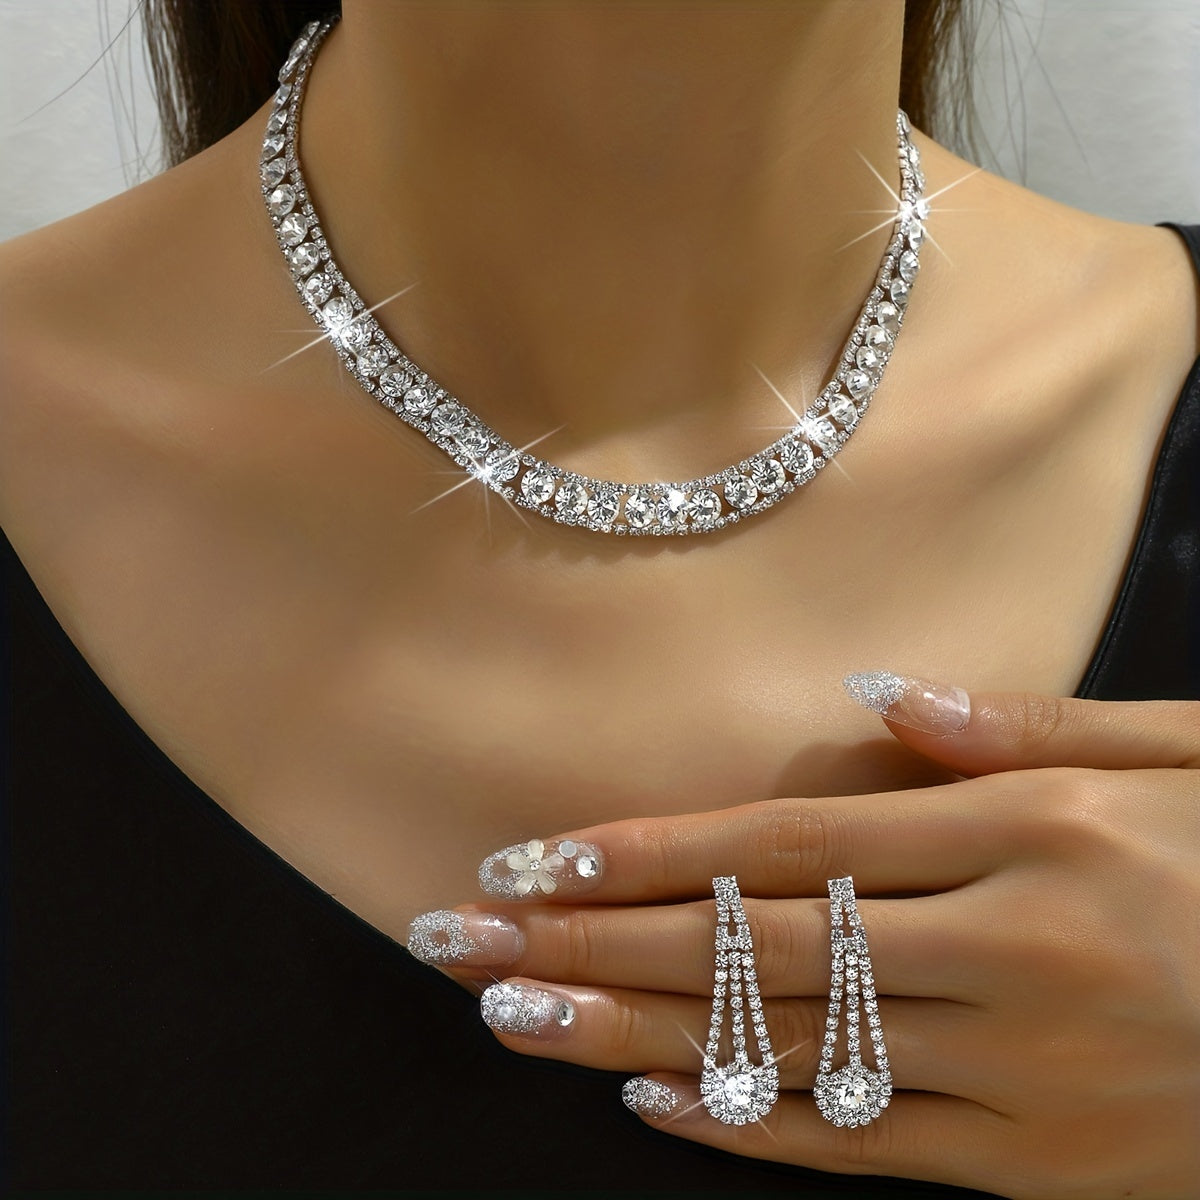 3pcs Elegant Silver Plated Rhinestone Jewelry Set for Weddings and Parties